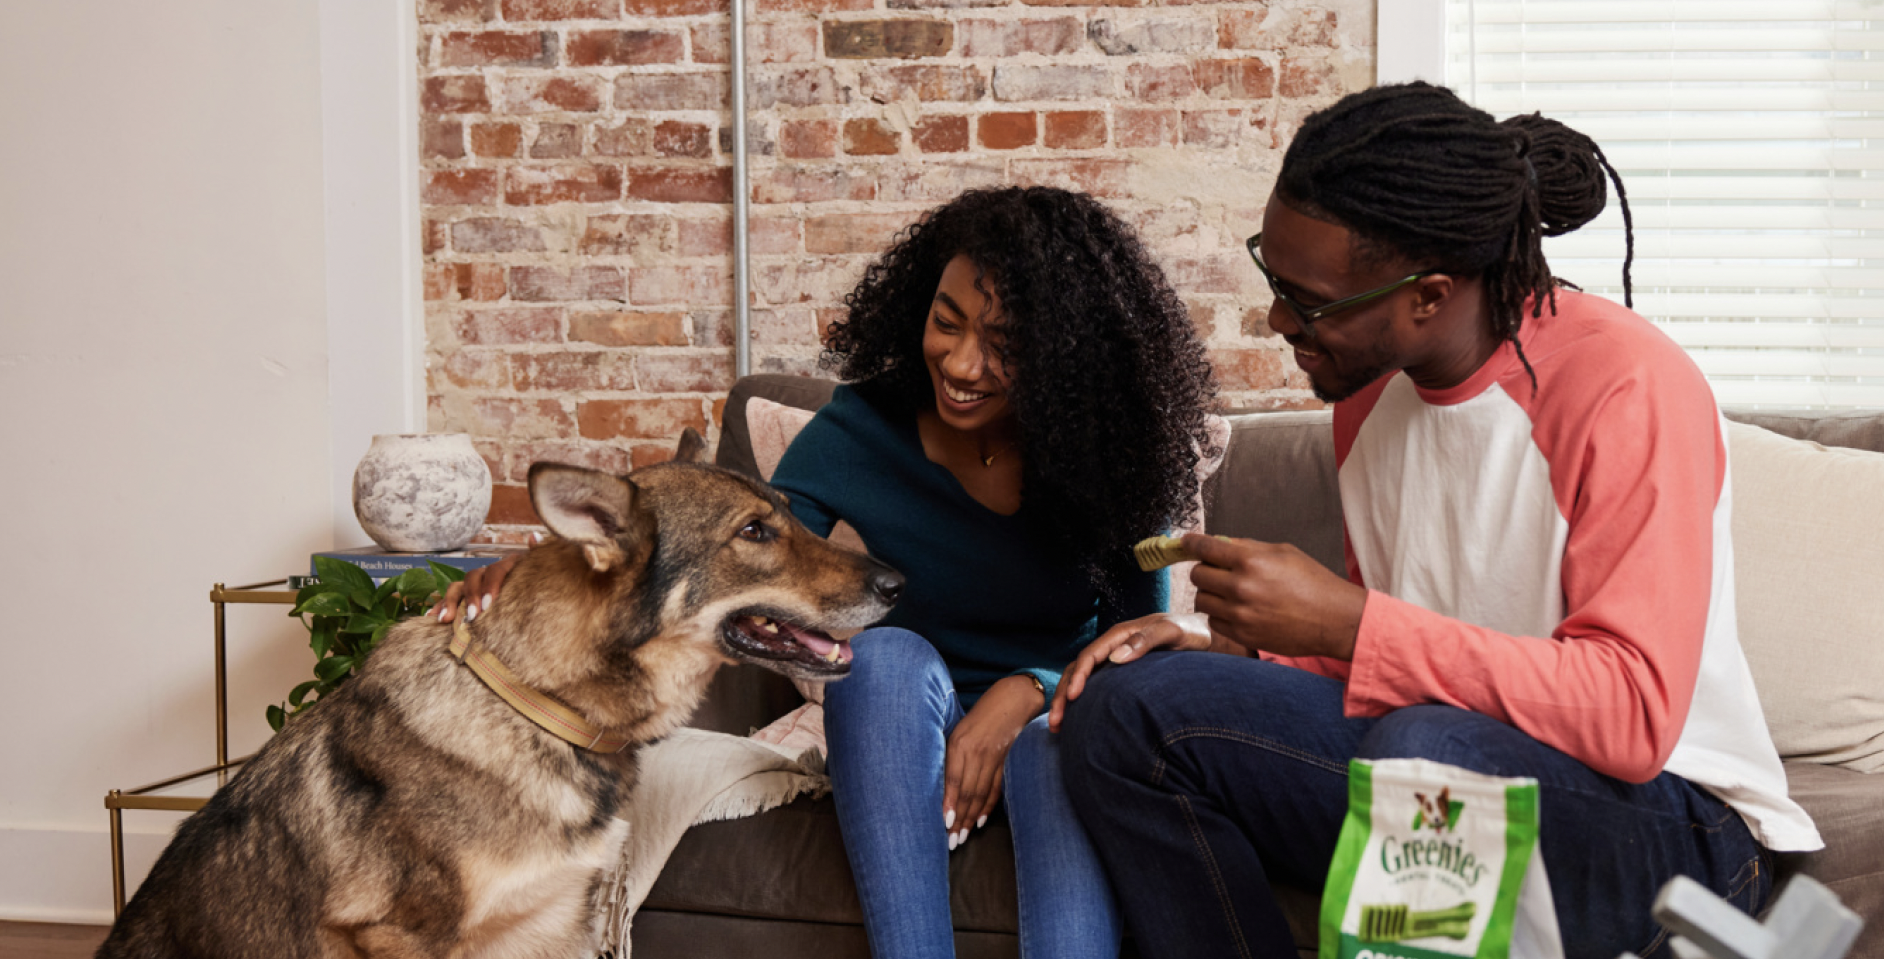 Man and woman on couch offer treat to dog